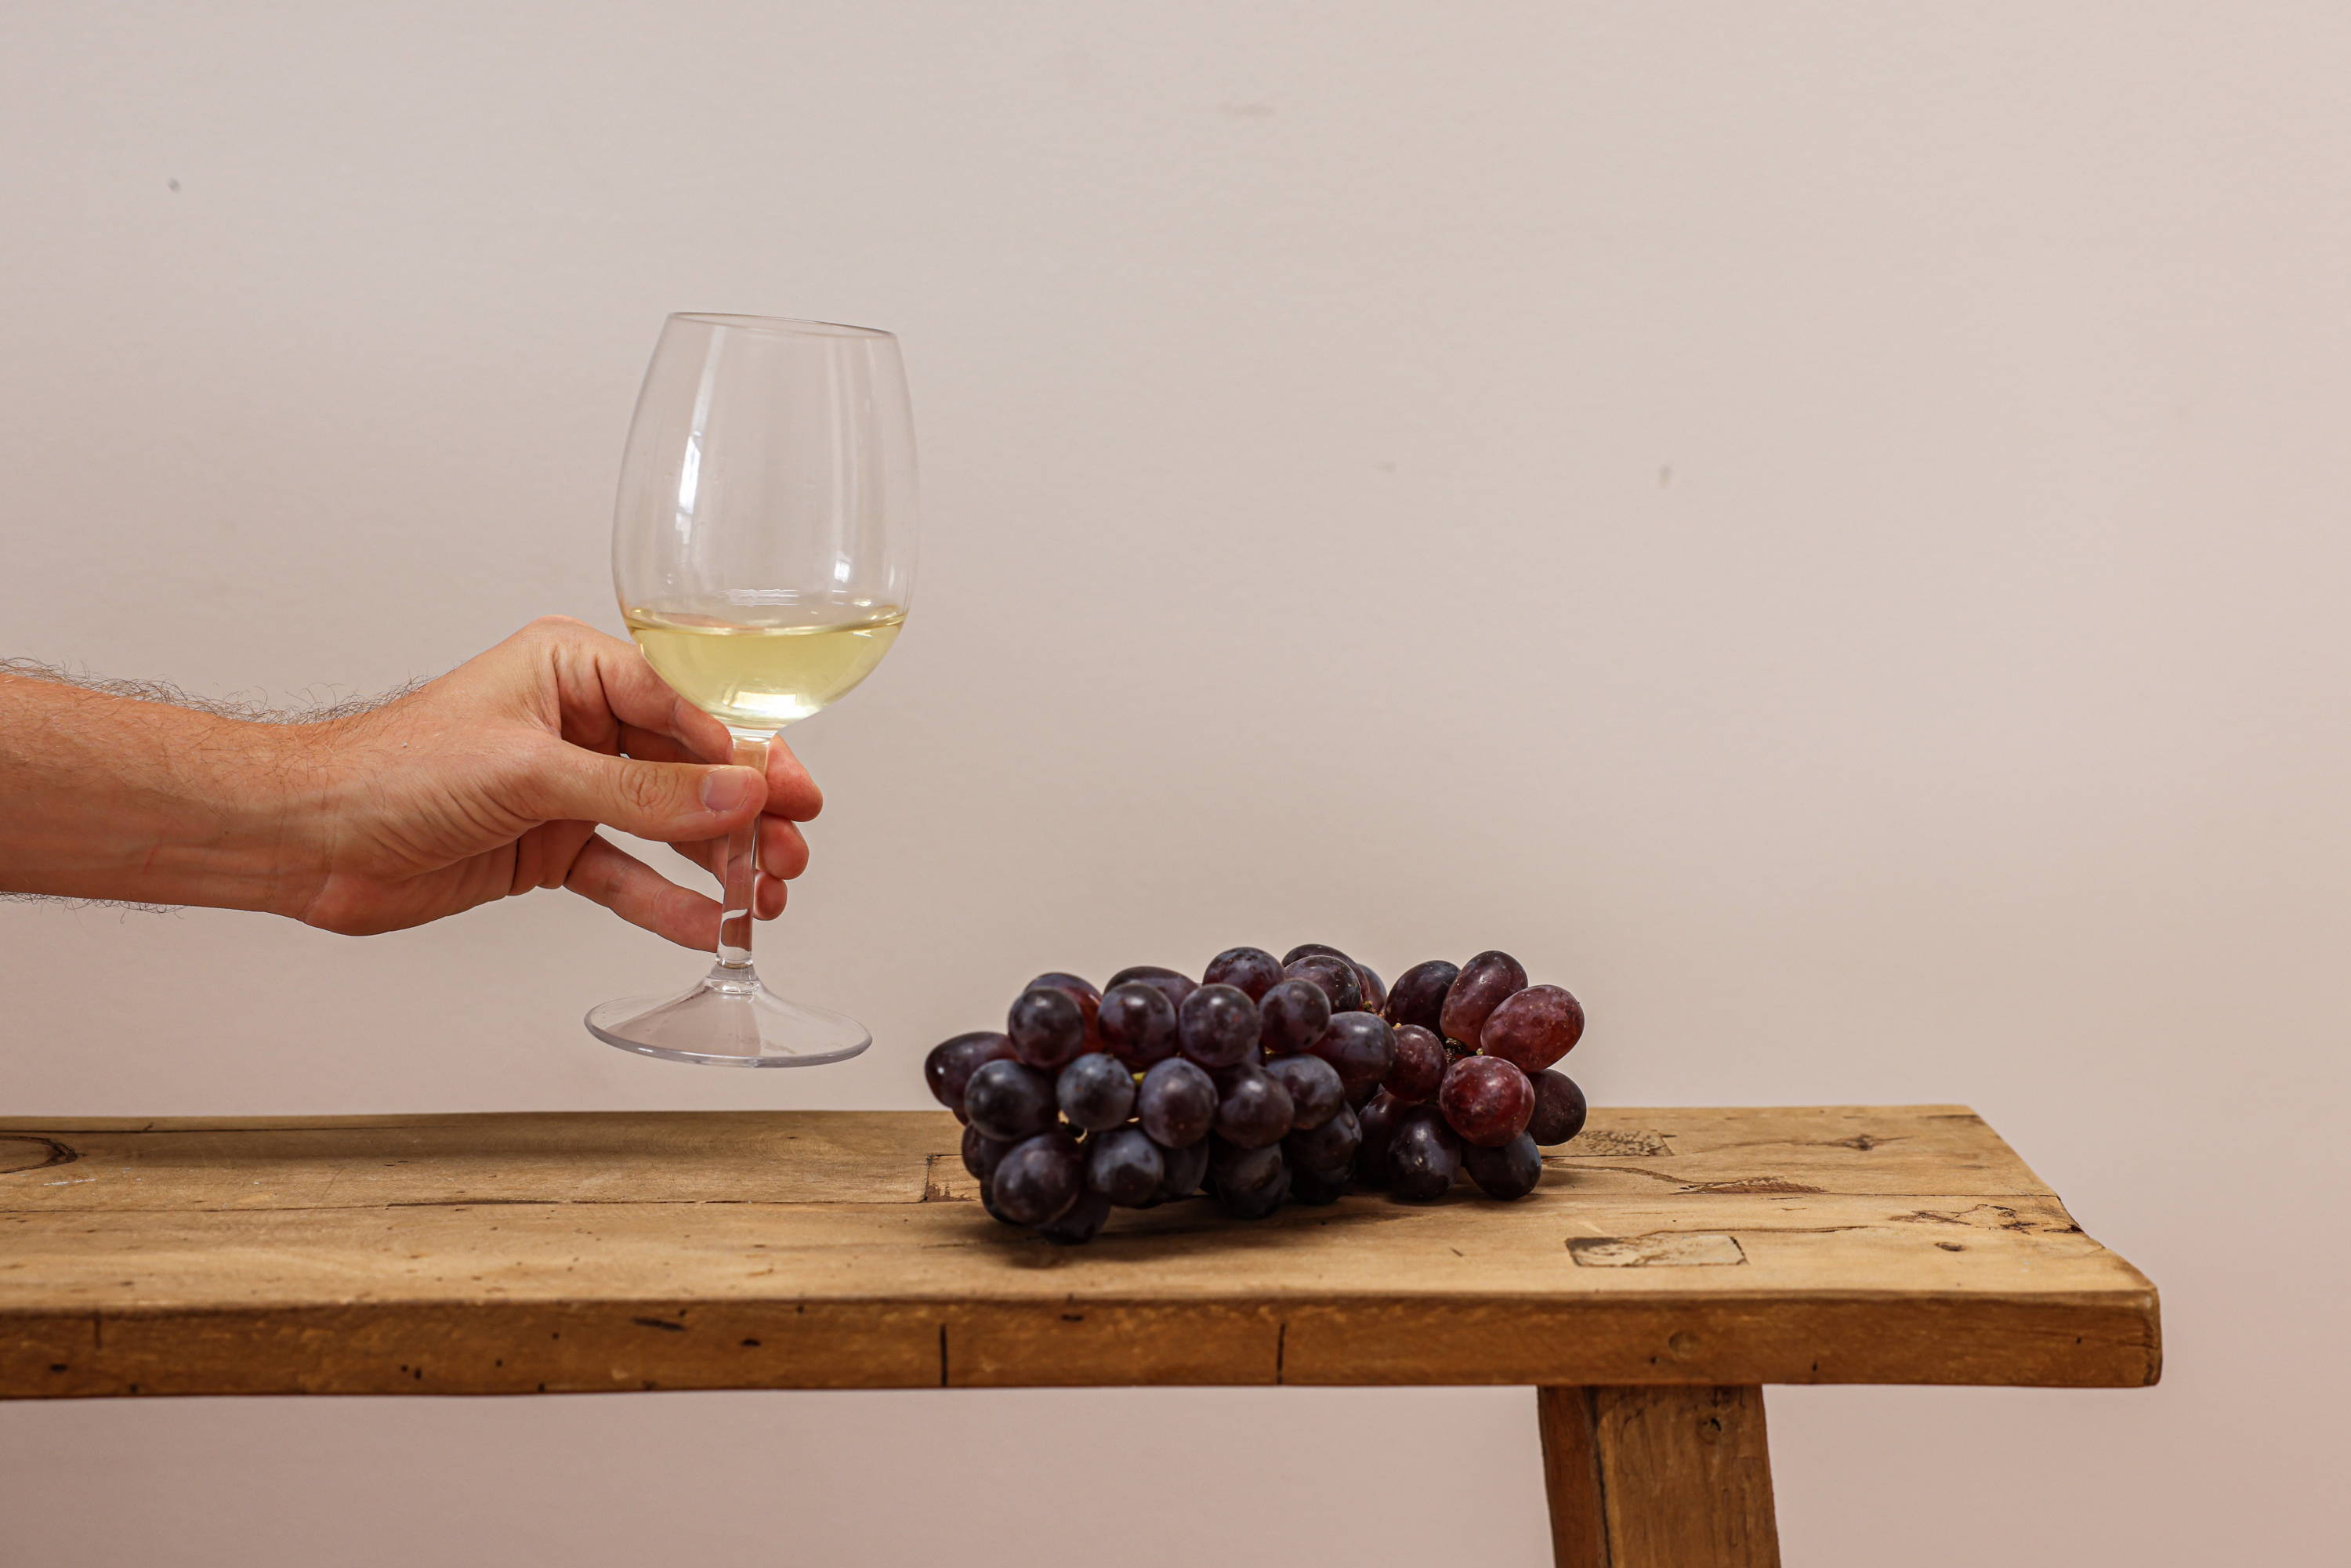 Wooden bench with grapes and a glass of white wine. 